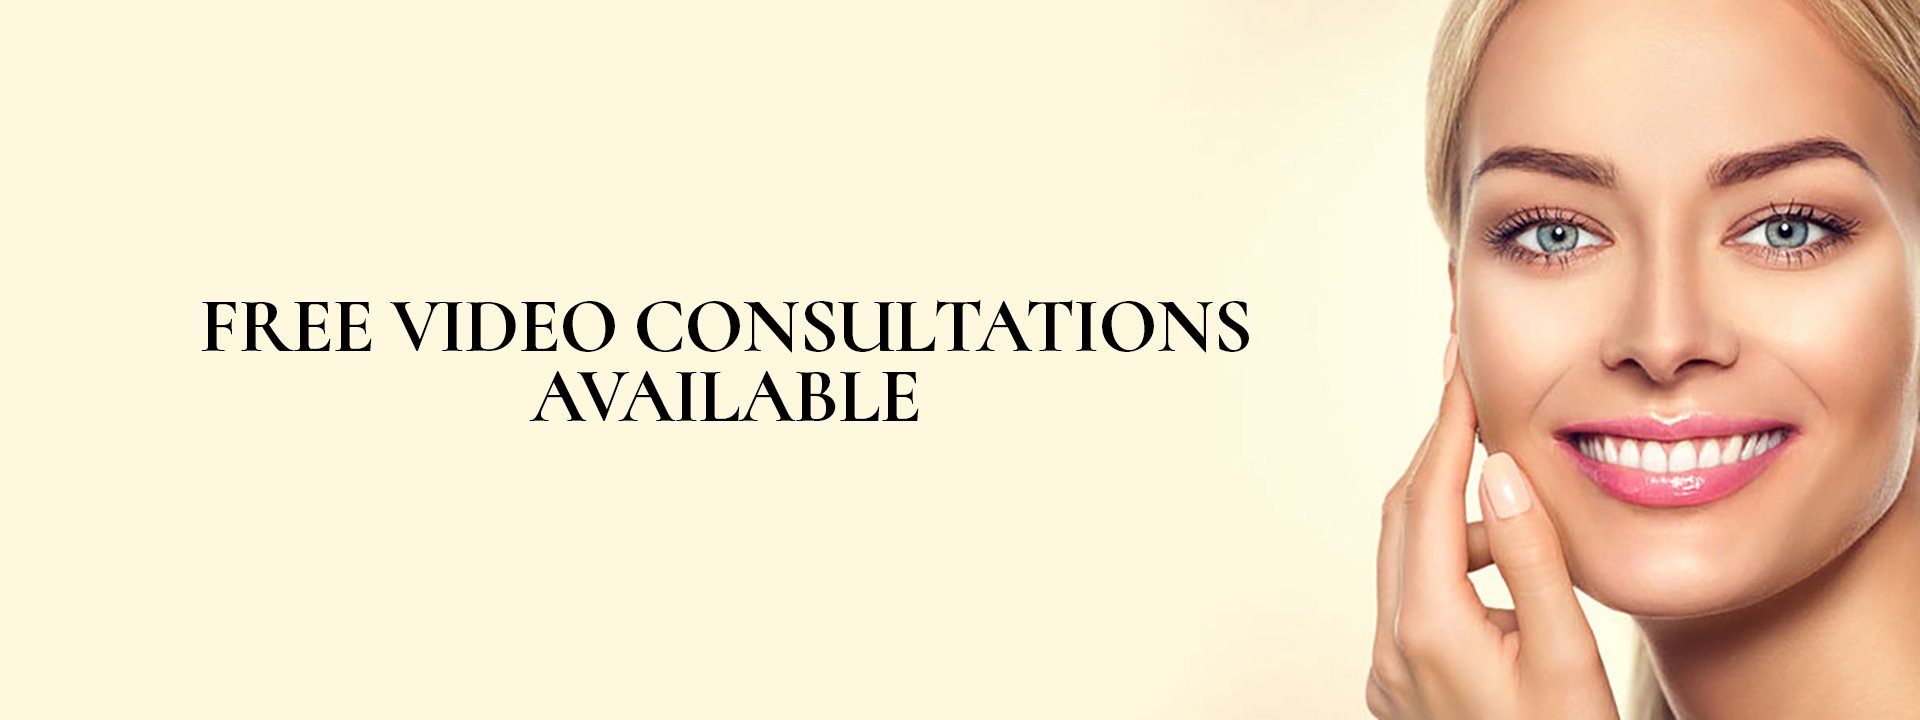 free Video Consultations Available at urban coiffeur hair salon in Wolverhampton